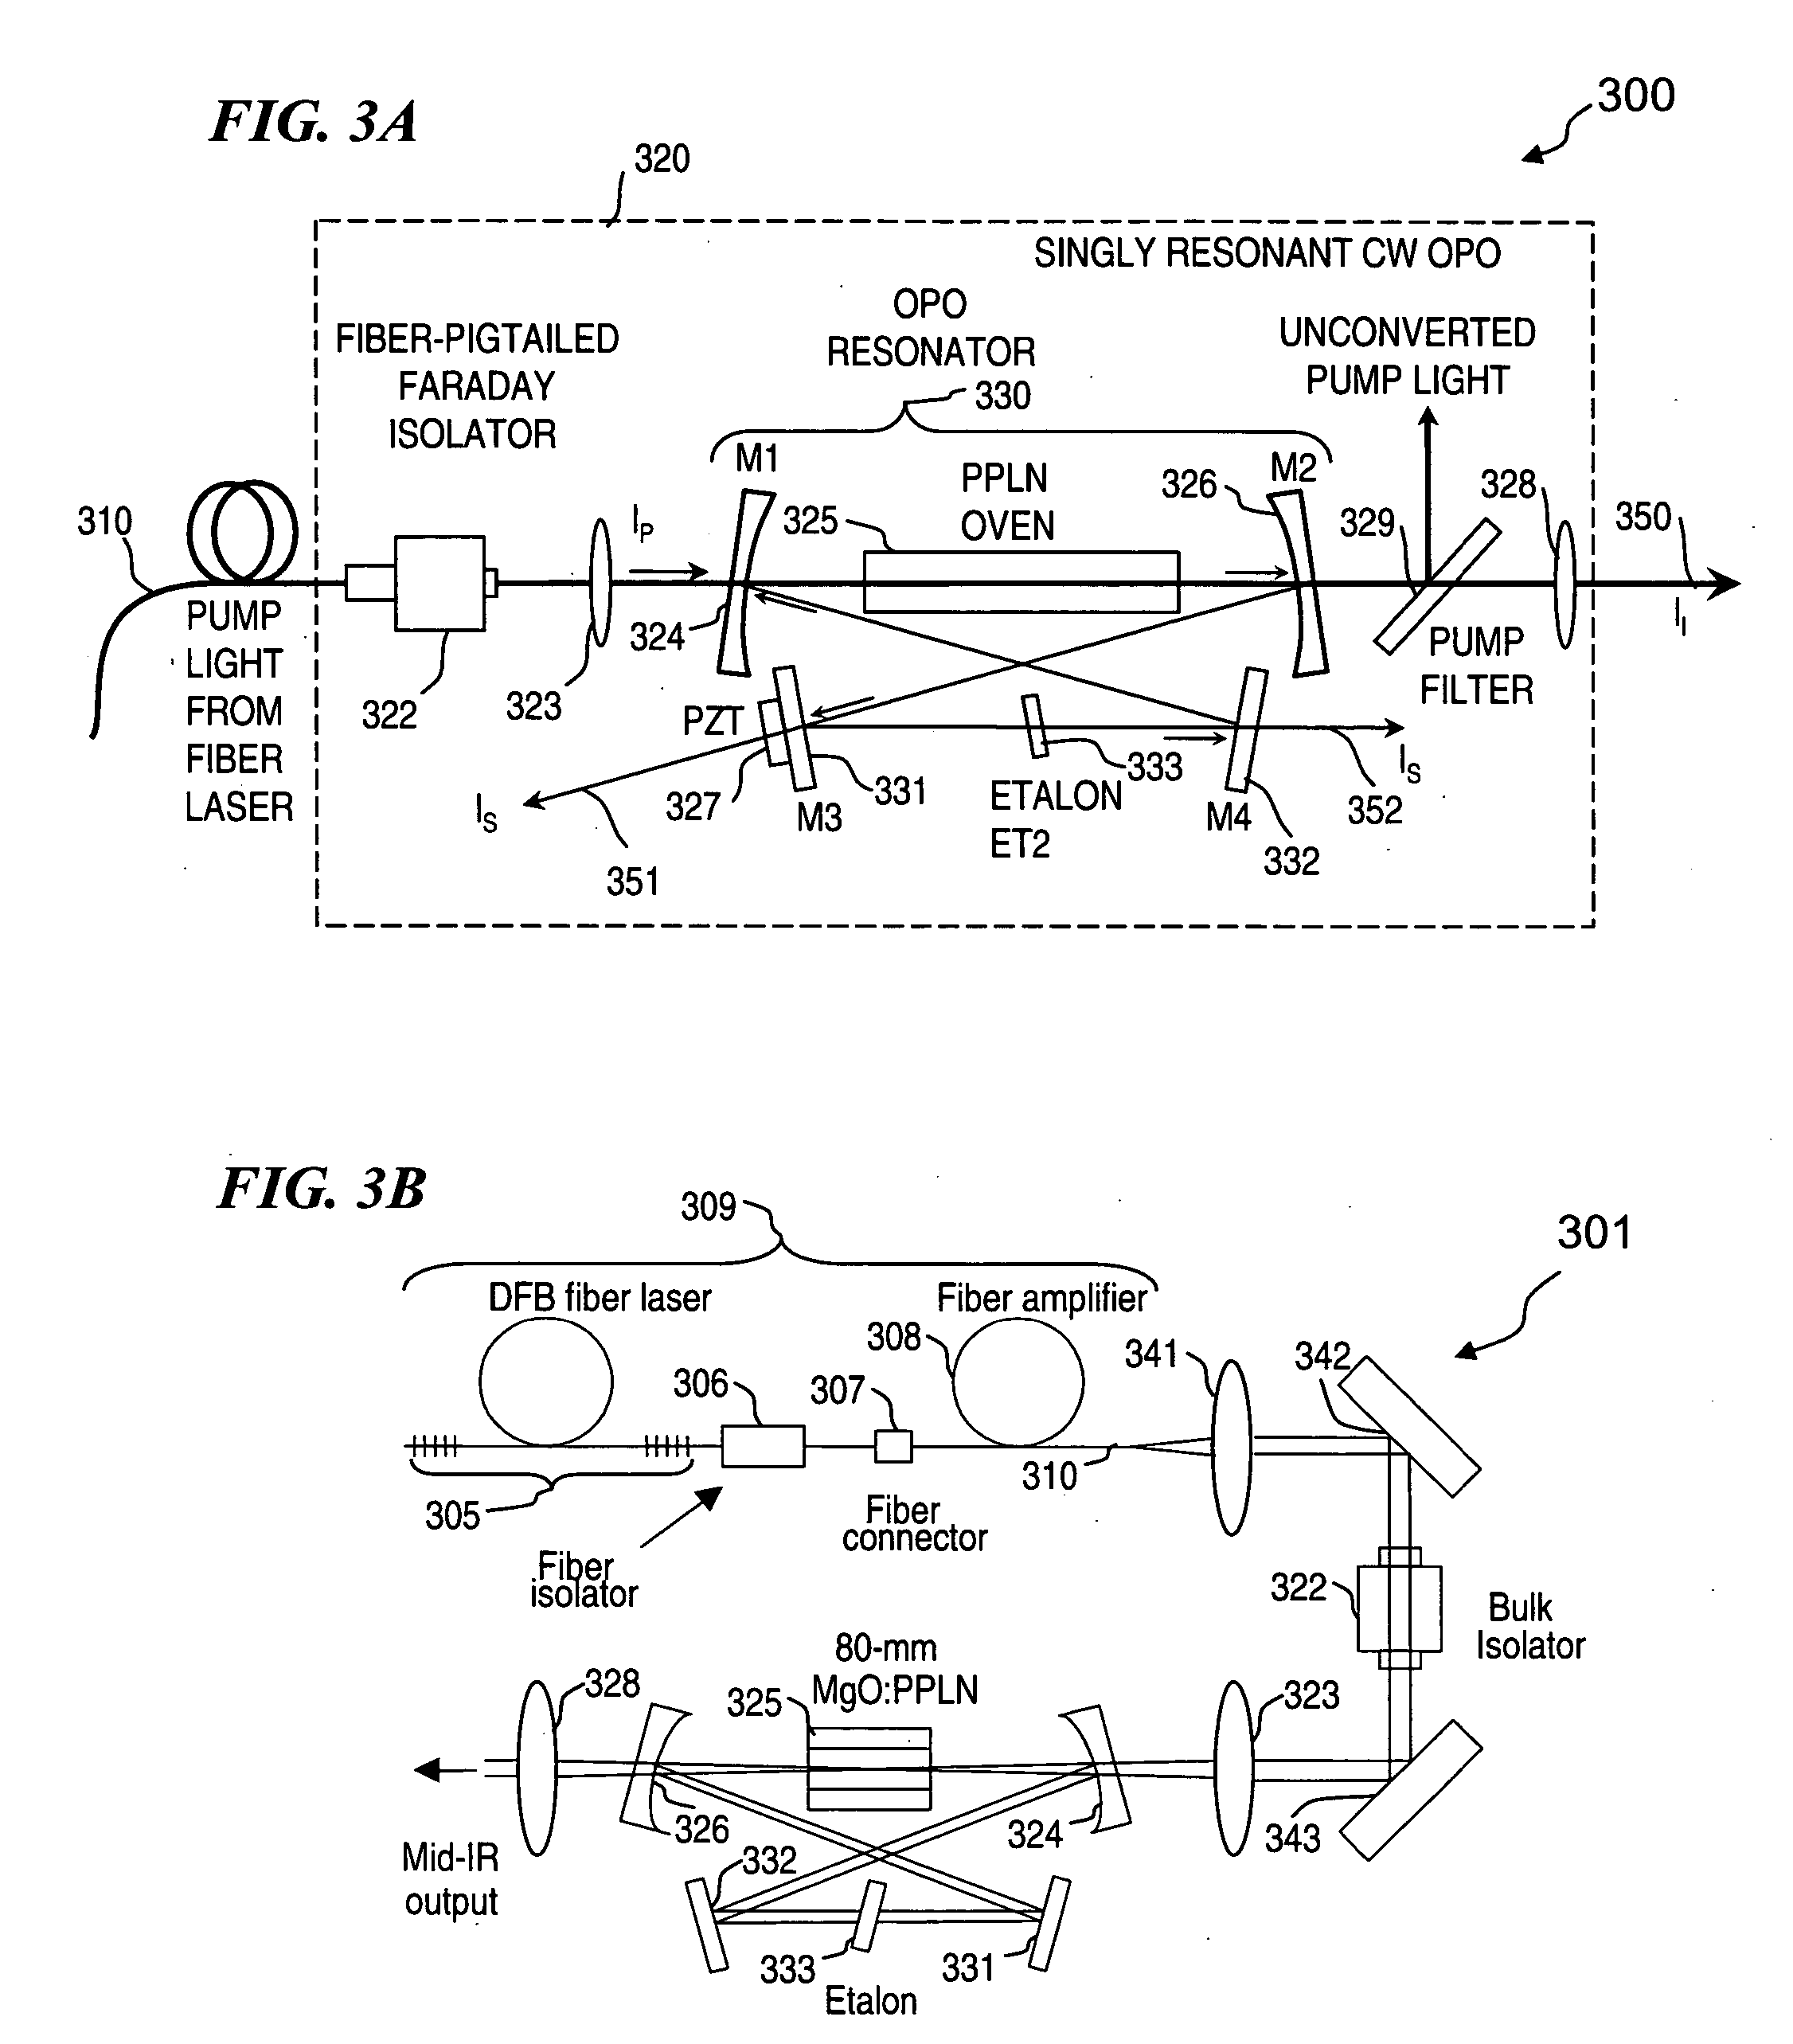 Apparatus and method for pumping and operating optical parametric oscillators using DFB fiber lasers